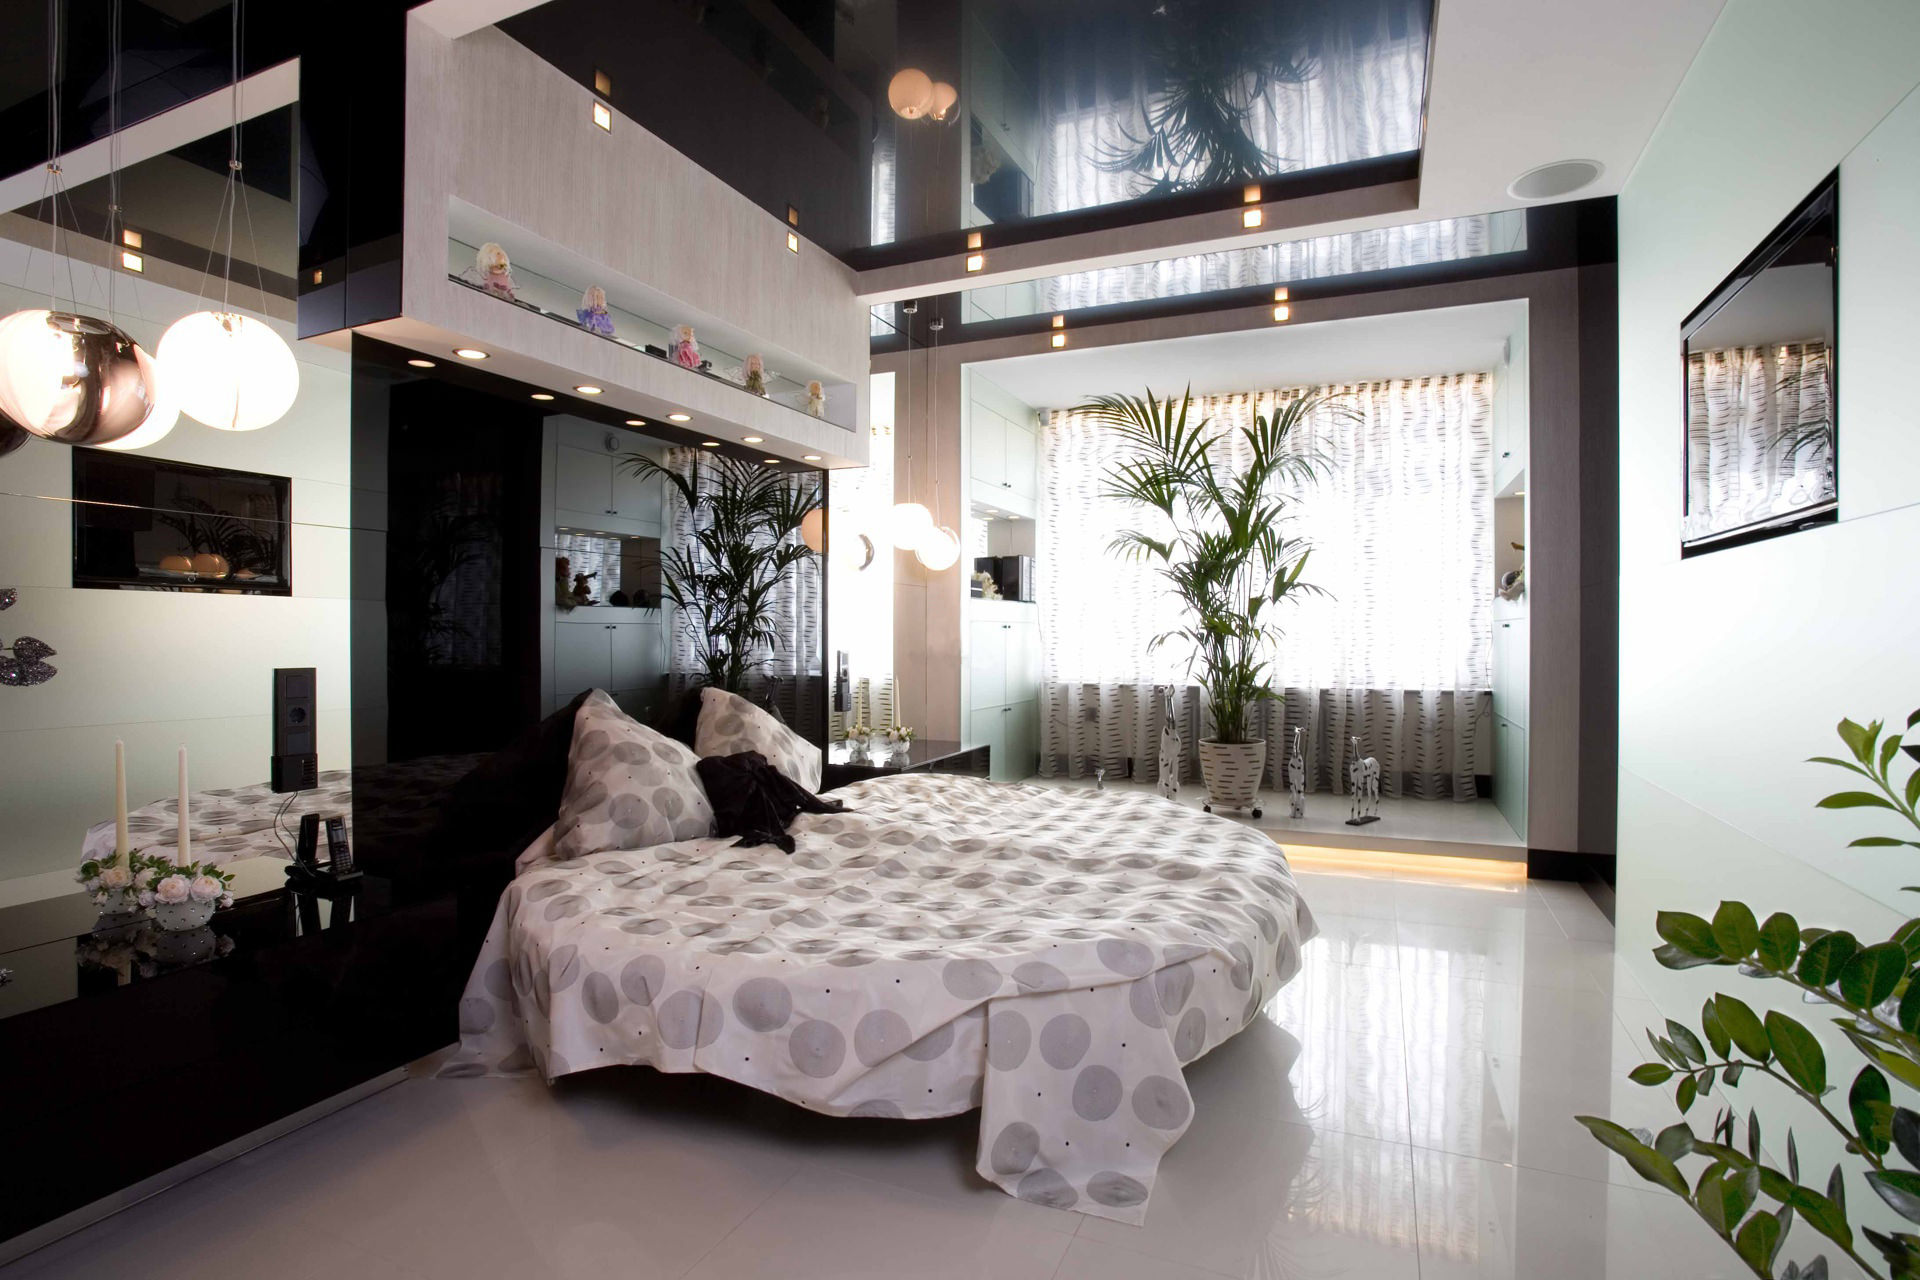 stretch ceilings in the bedroom glossy